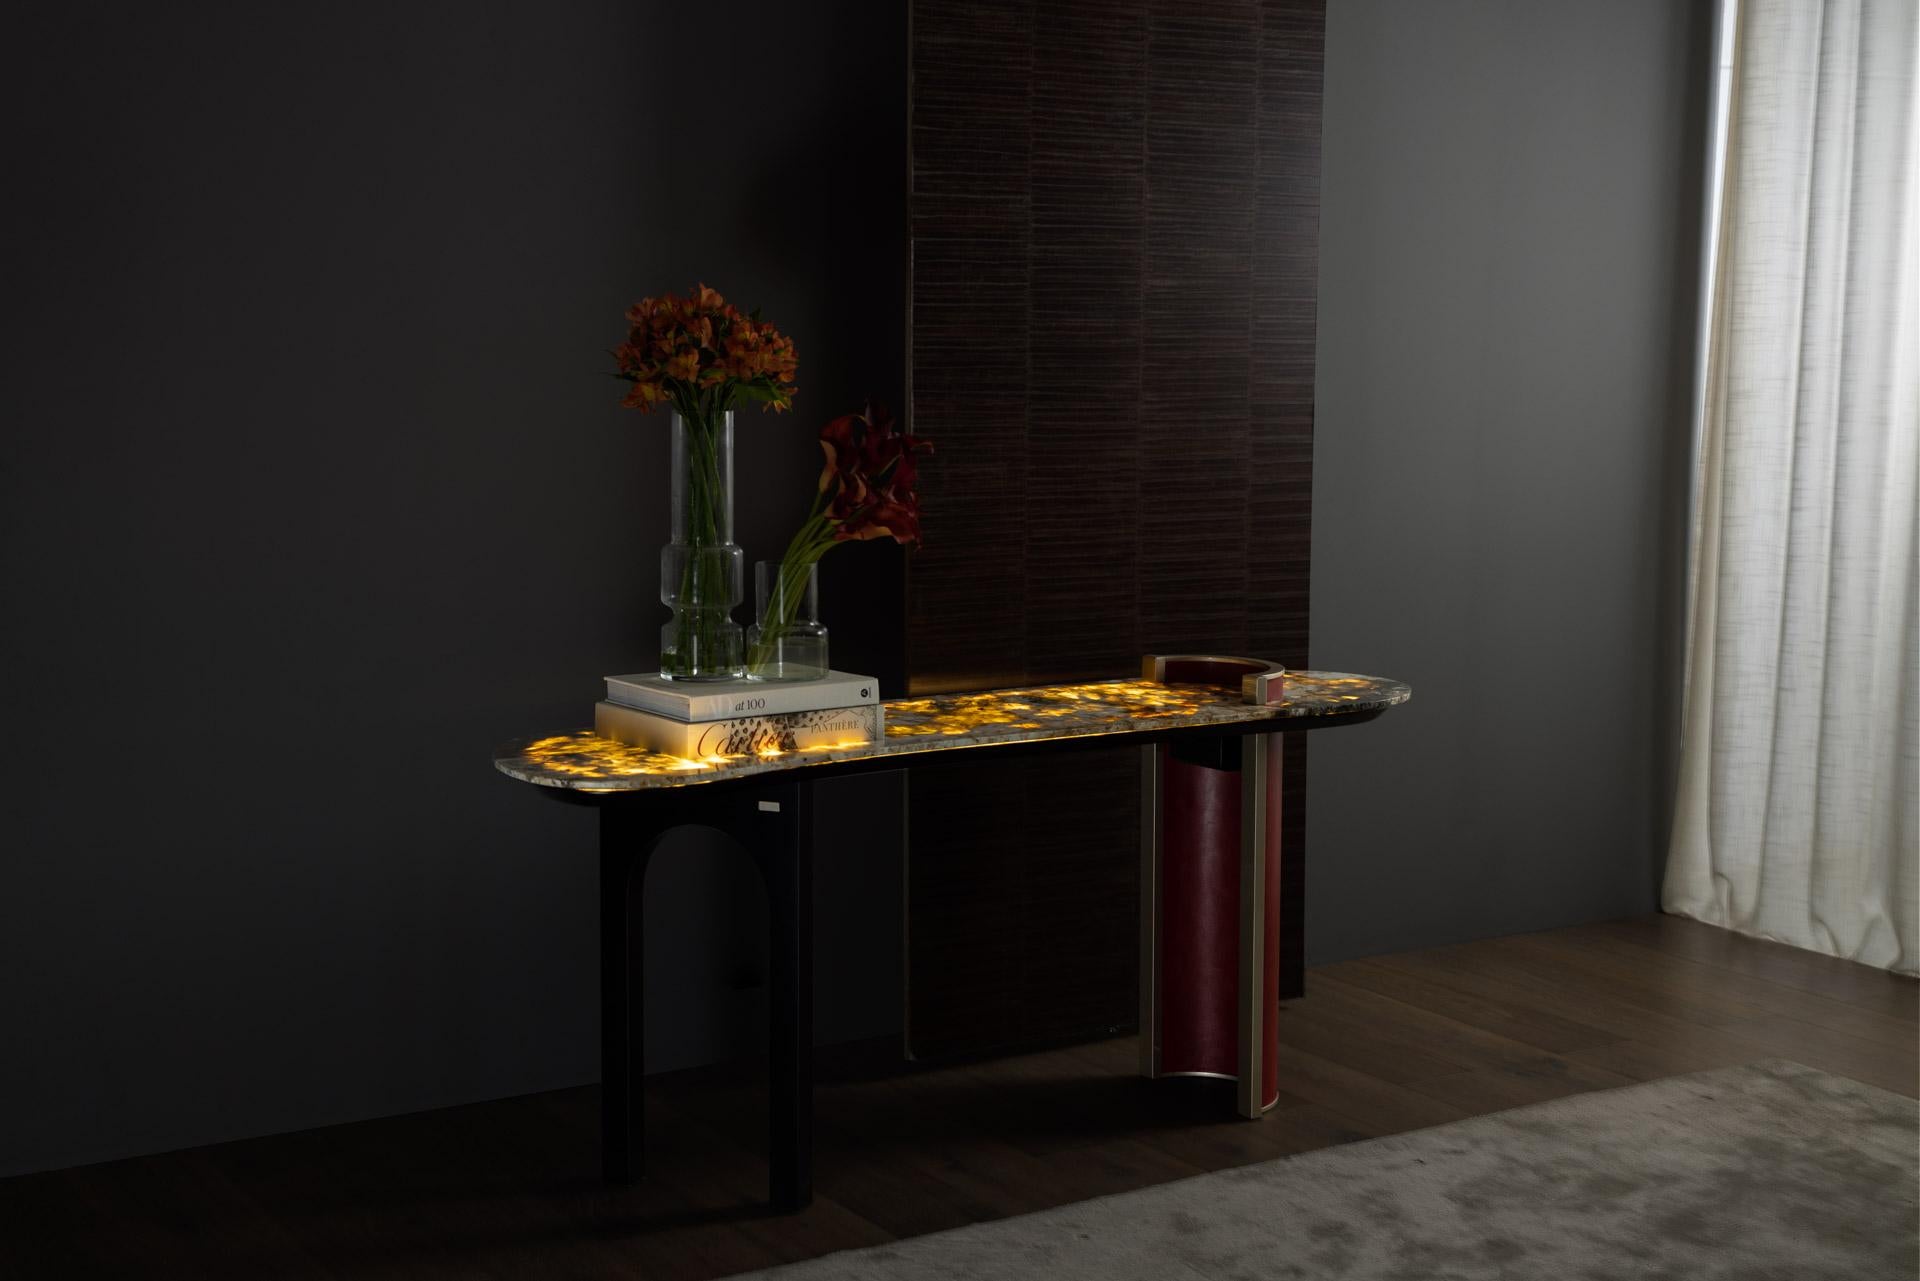 Chiado Console, Modern Collection, Handcrafted in Portugal - Europe by Greenapple.

Designed by Rute Martins for the Modern Collection, the Chiado console table honors Lisbon’s historic quarter, capturing the essence of its artistic life and